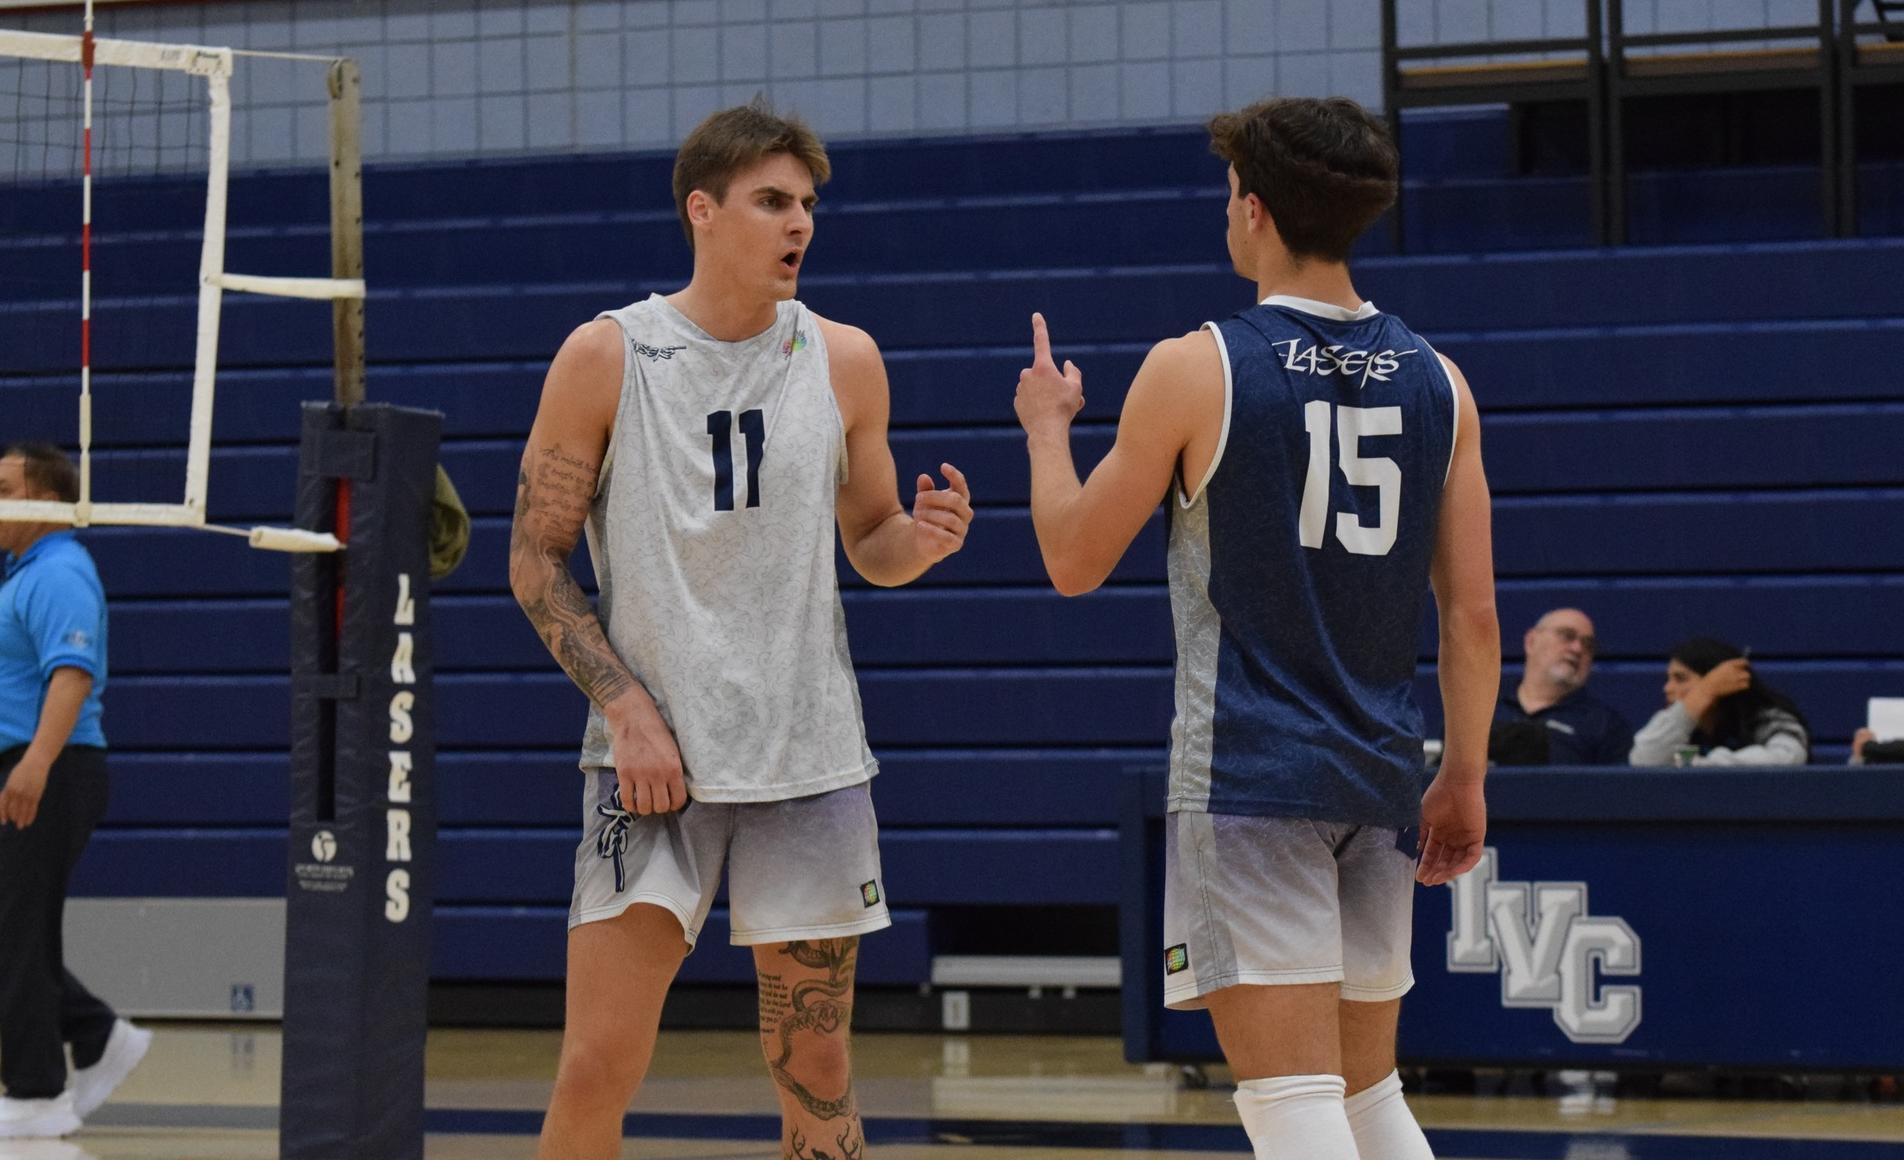 Men's volleyball team sweeps Fullerton at home for 11th win